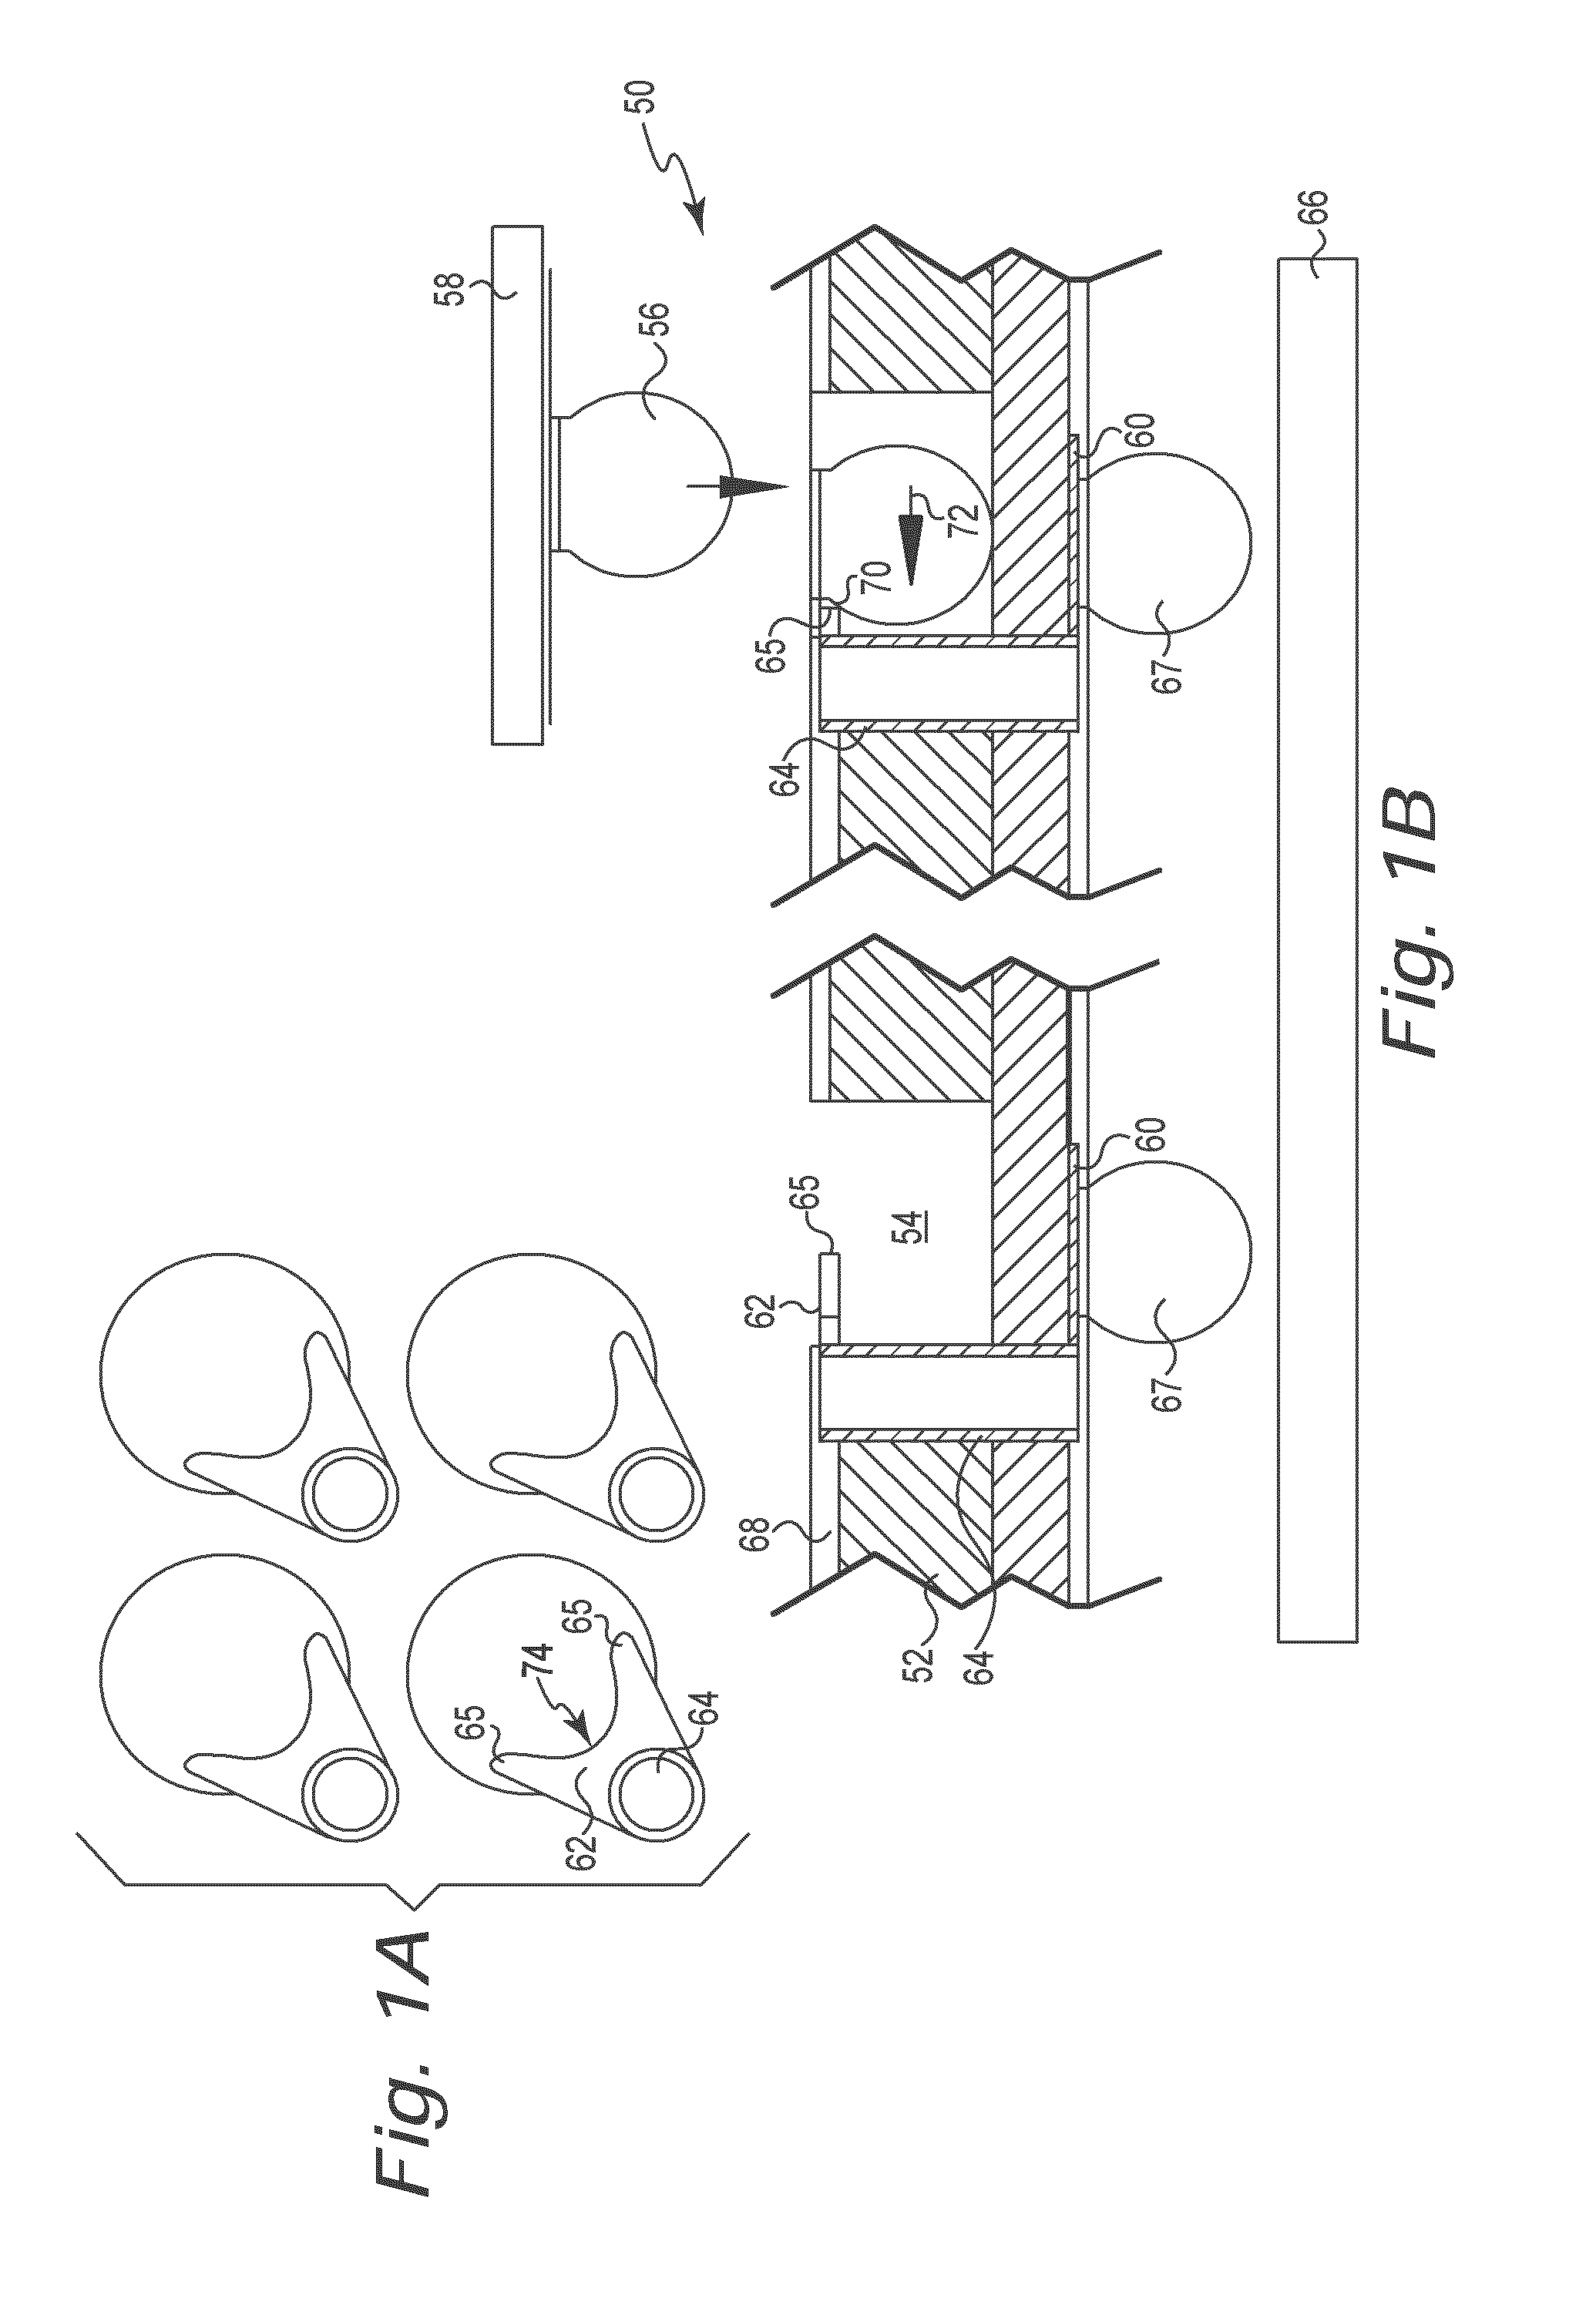 High performance surface mount electrical interconnect with external biased normal force loading